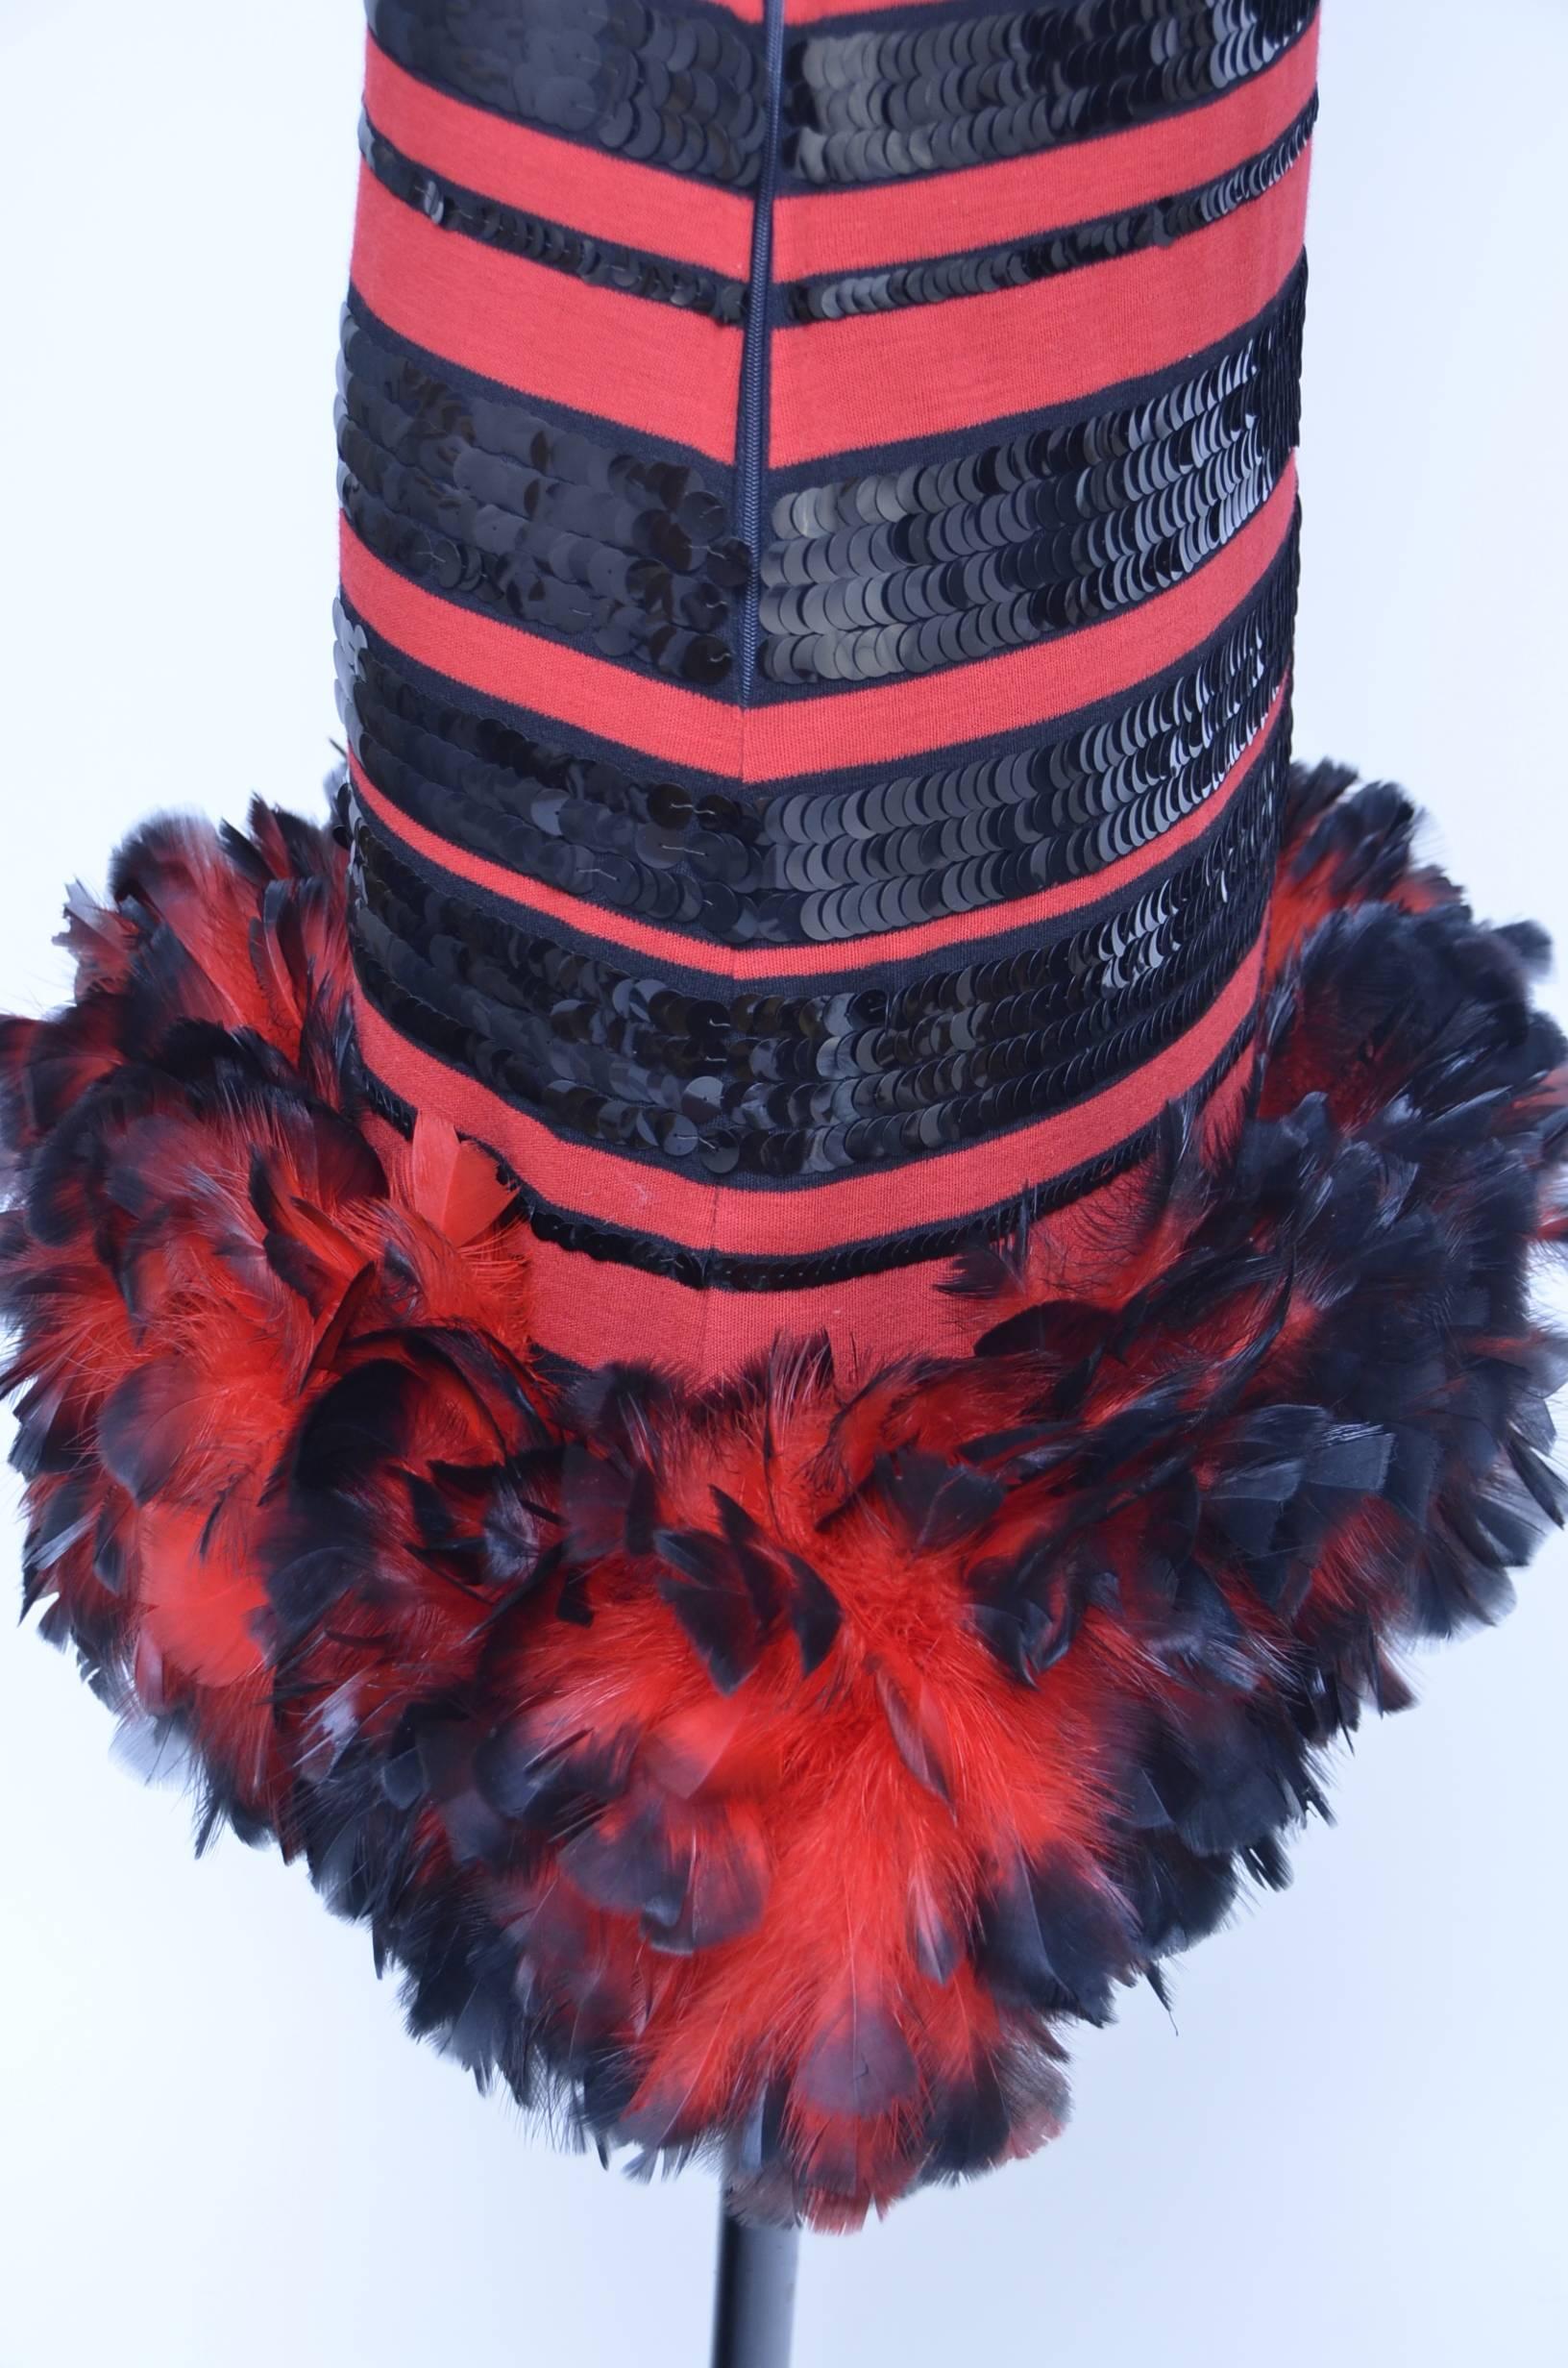 Michaele  Vollbracht Feathers And Sequins Dress, 1980s  For Sale 1